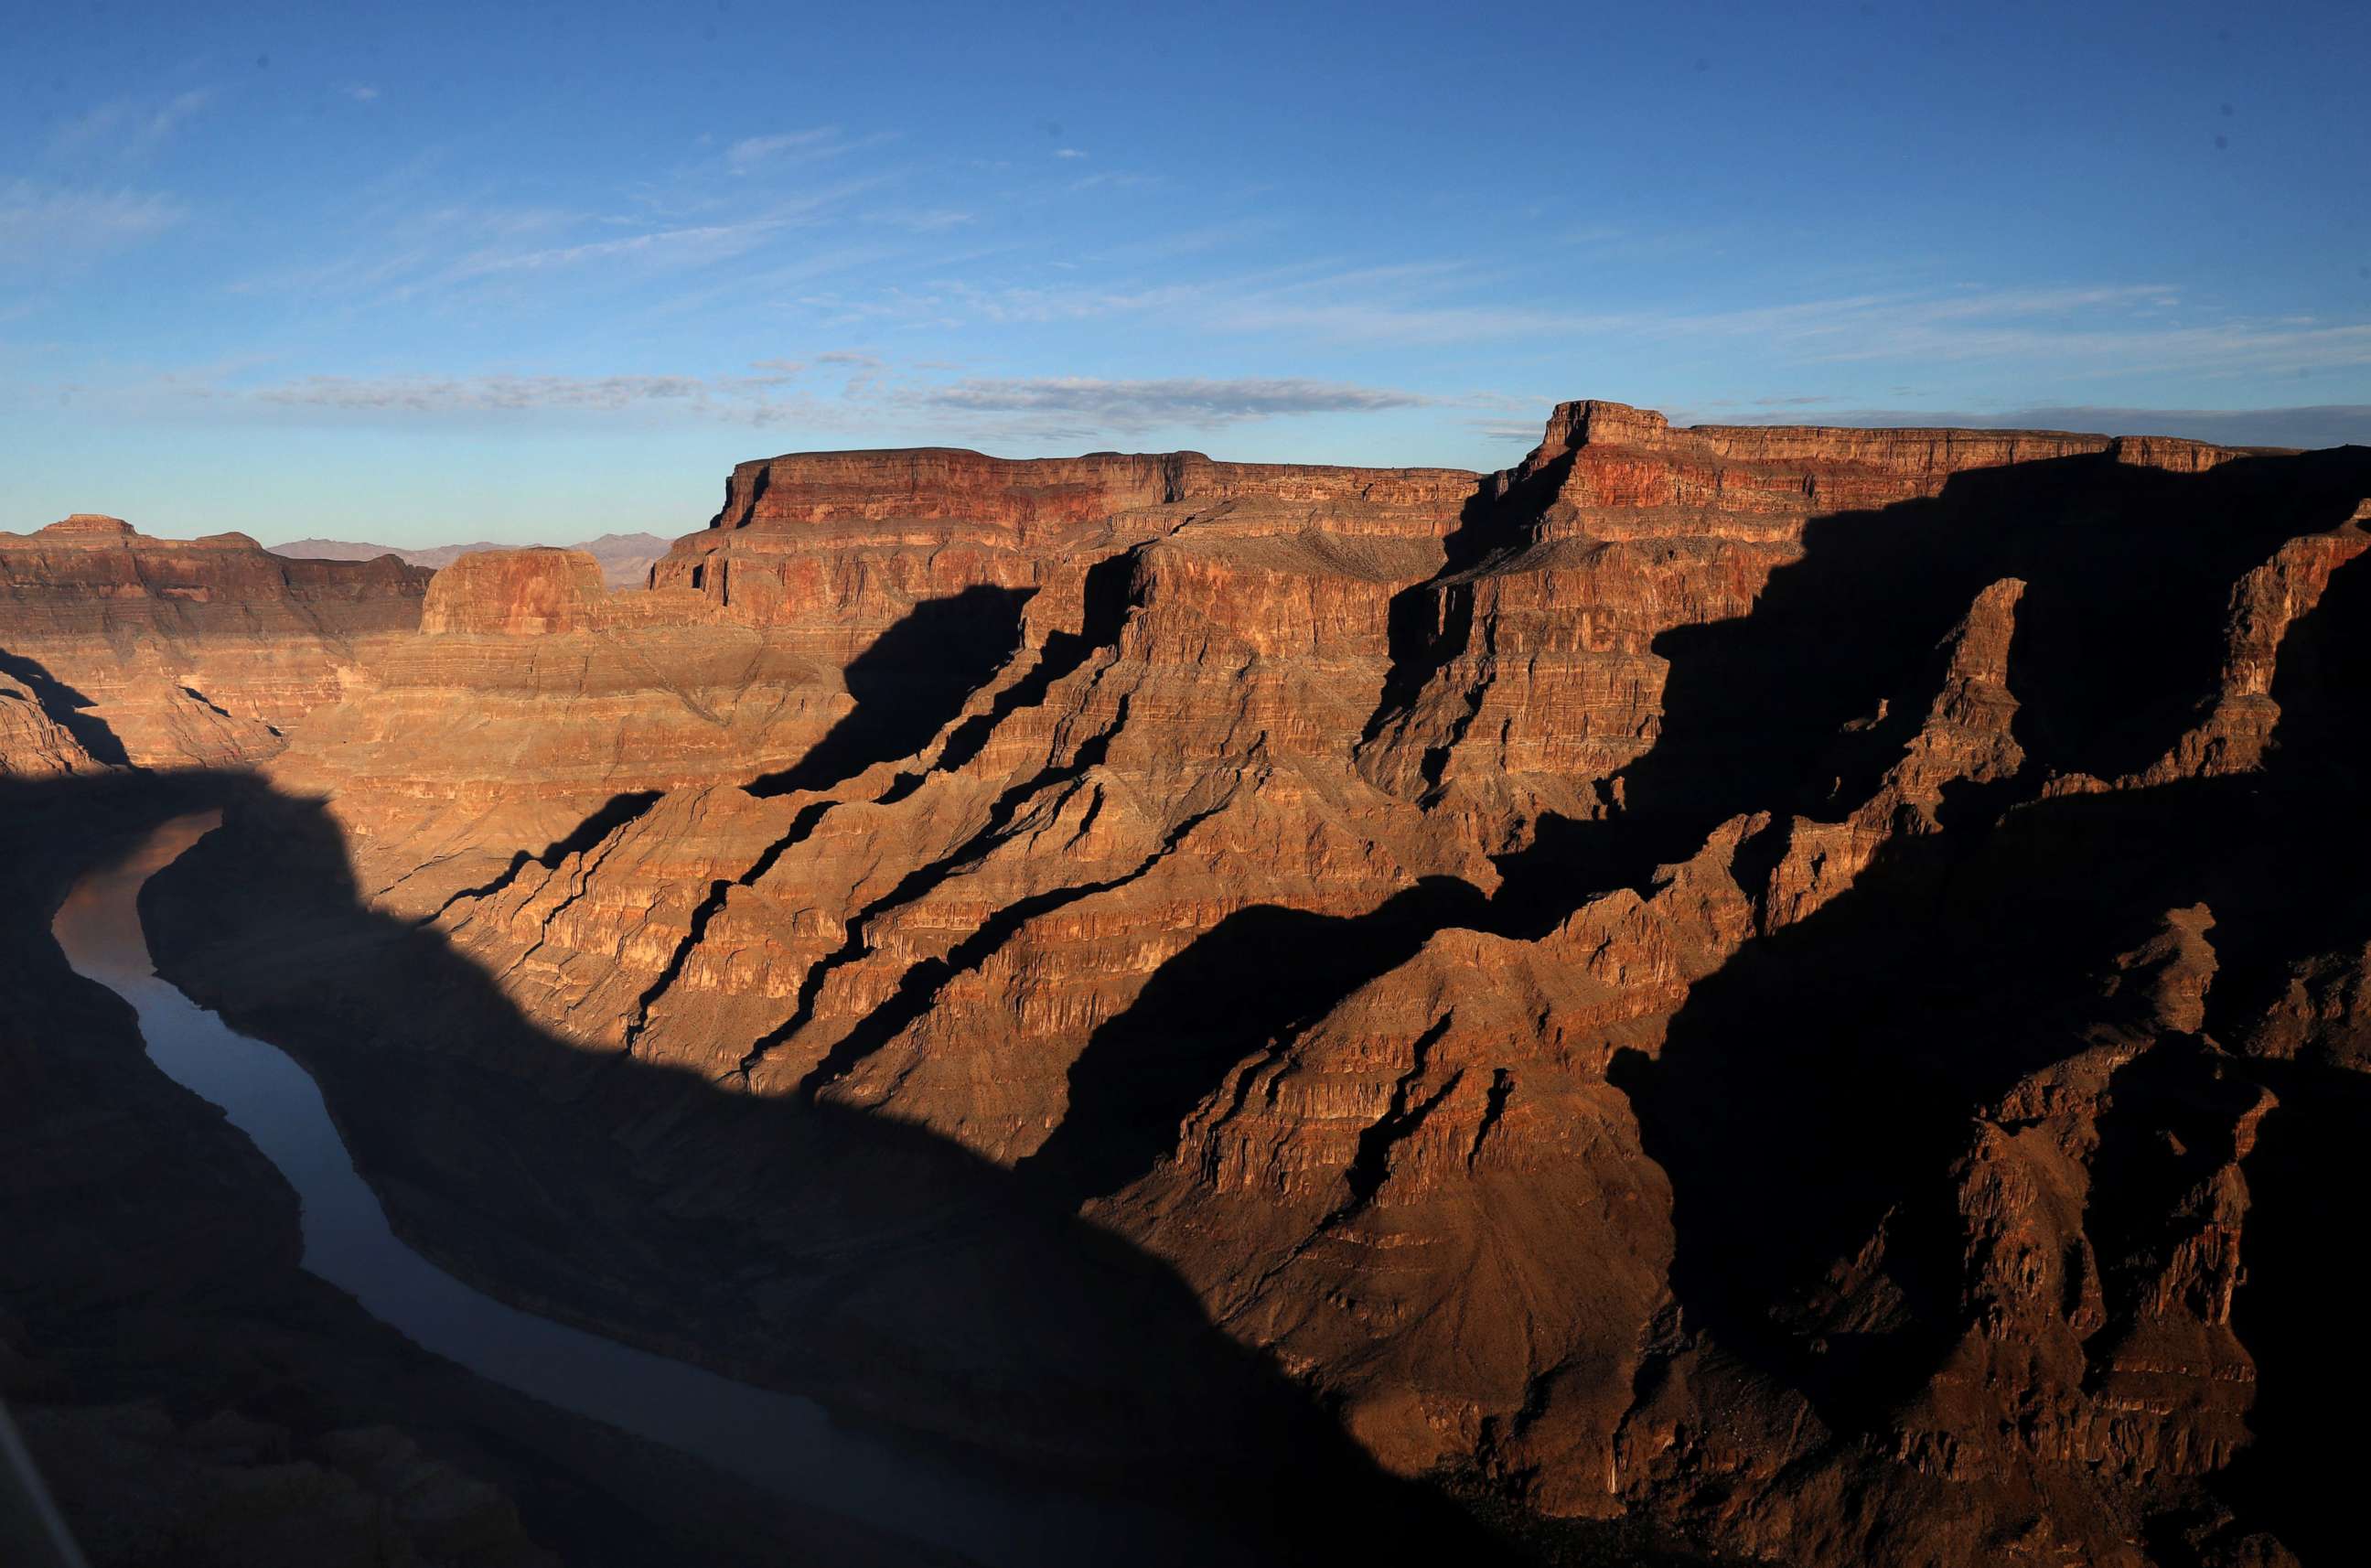 PHOTO: The Colorado River winds its way along the West Rim of the Grand Canyon in the Hualapai Indian Reservation on January 10, 2019 near Peach Springs, Arizona.